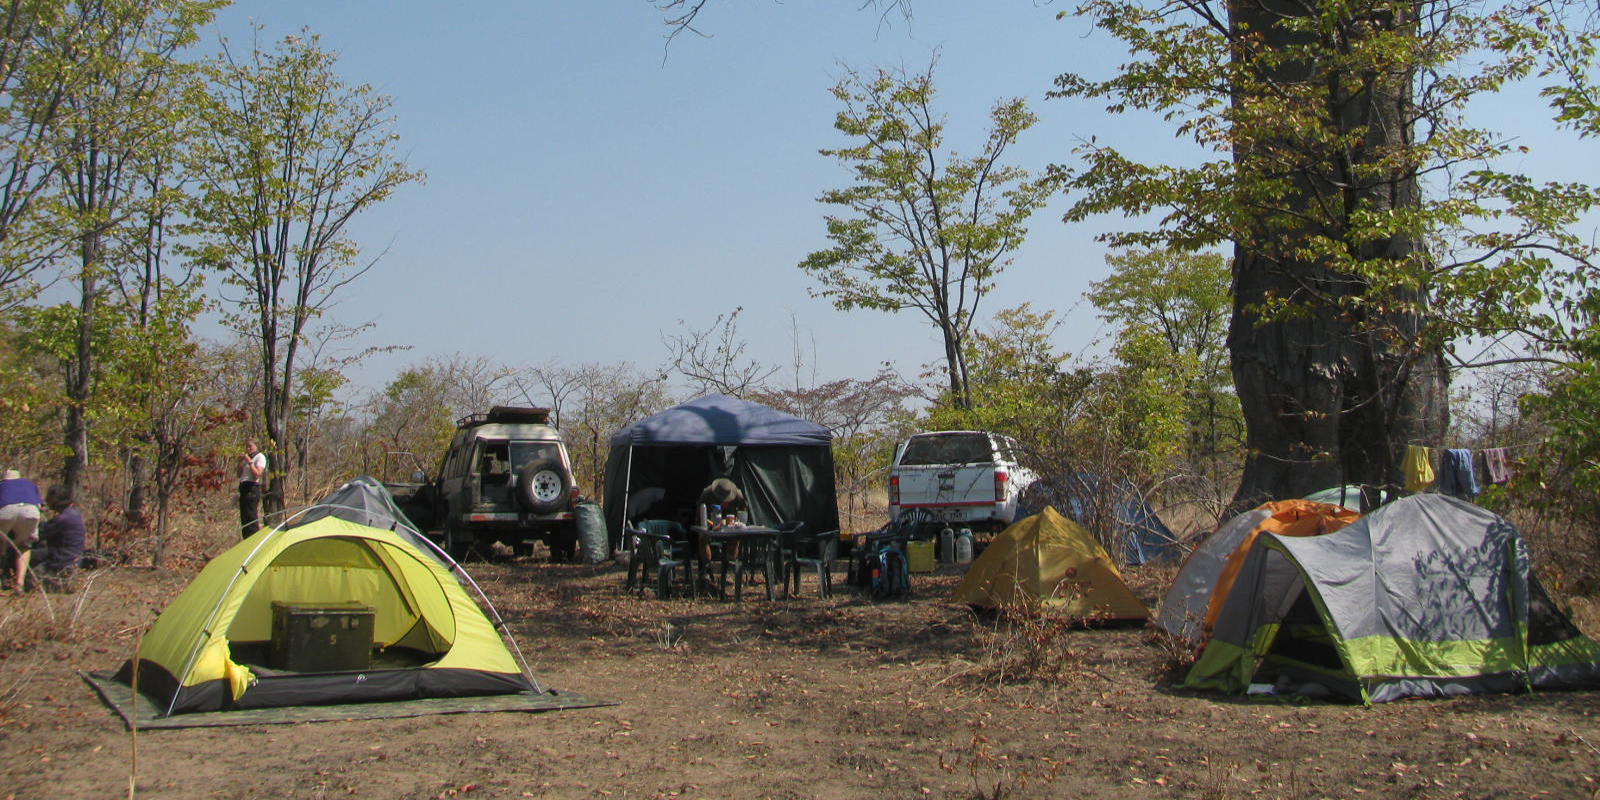 Tents and vehicles on flat terrain